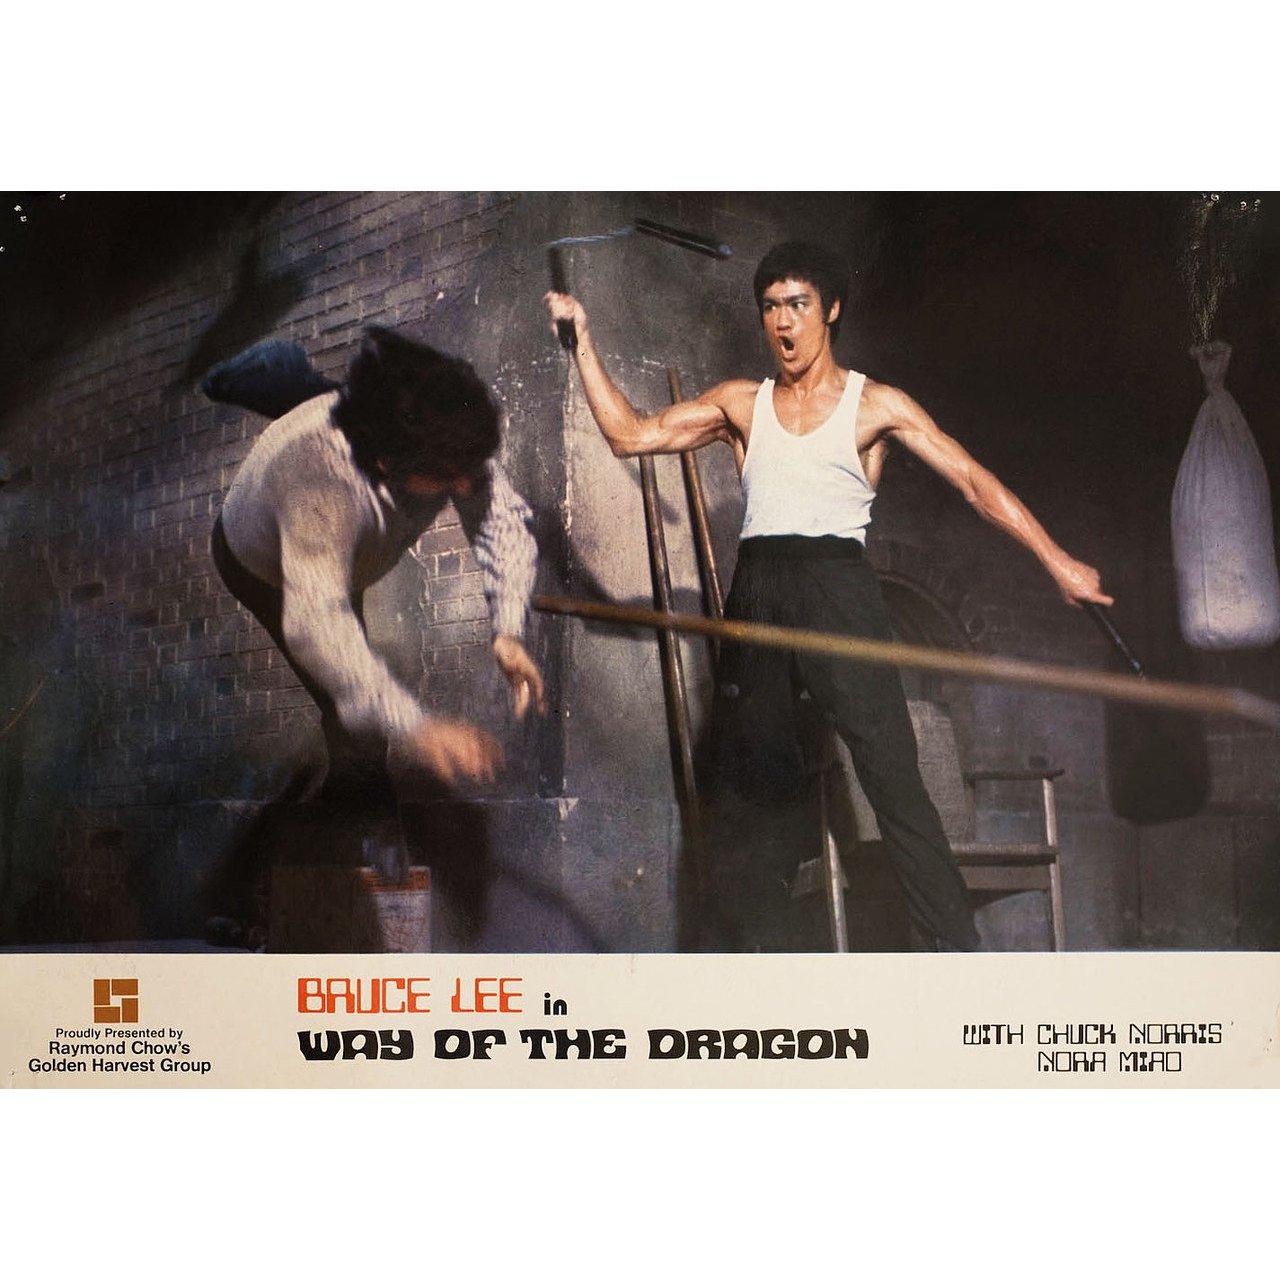 Original 1982 re-release Hong Kong scene card for the 1972 film The Way of the Dragon (Meng long guo jiang) directed by Bruce Lee with Bruce Lee / Nora Miao / Chuck Norris / Ping Ou Wei. Very good-fine condition. Please note: the size is stated in